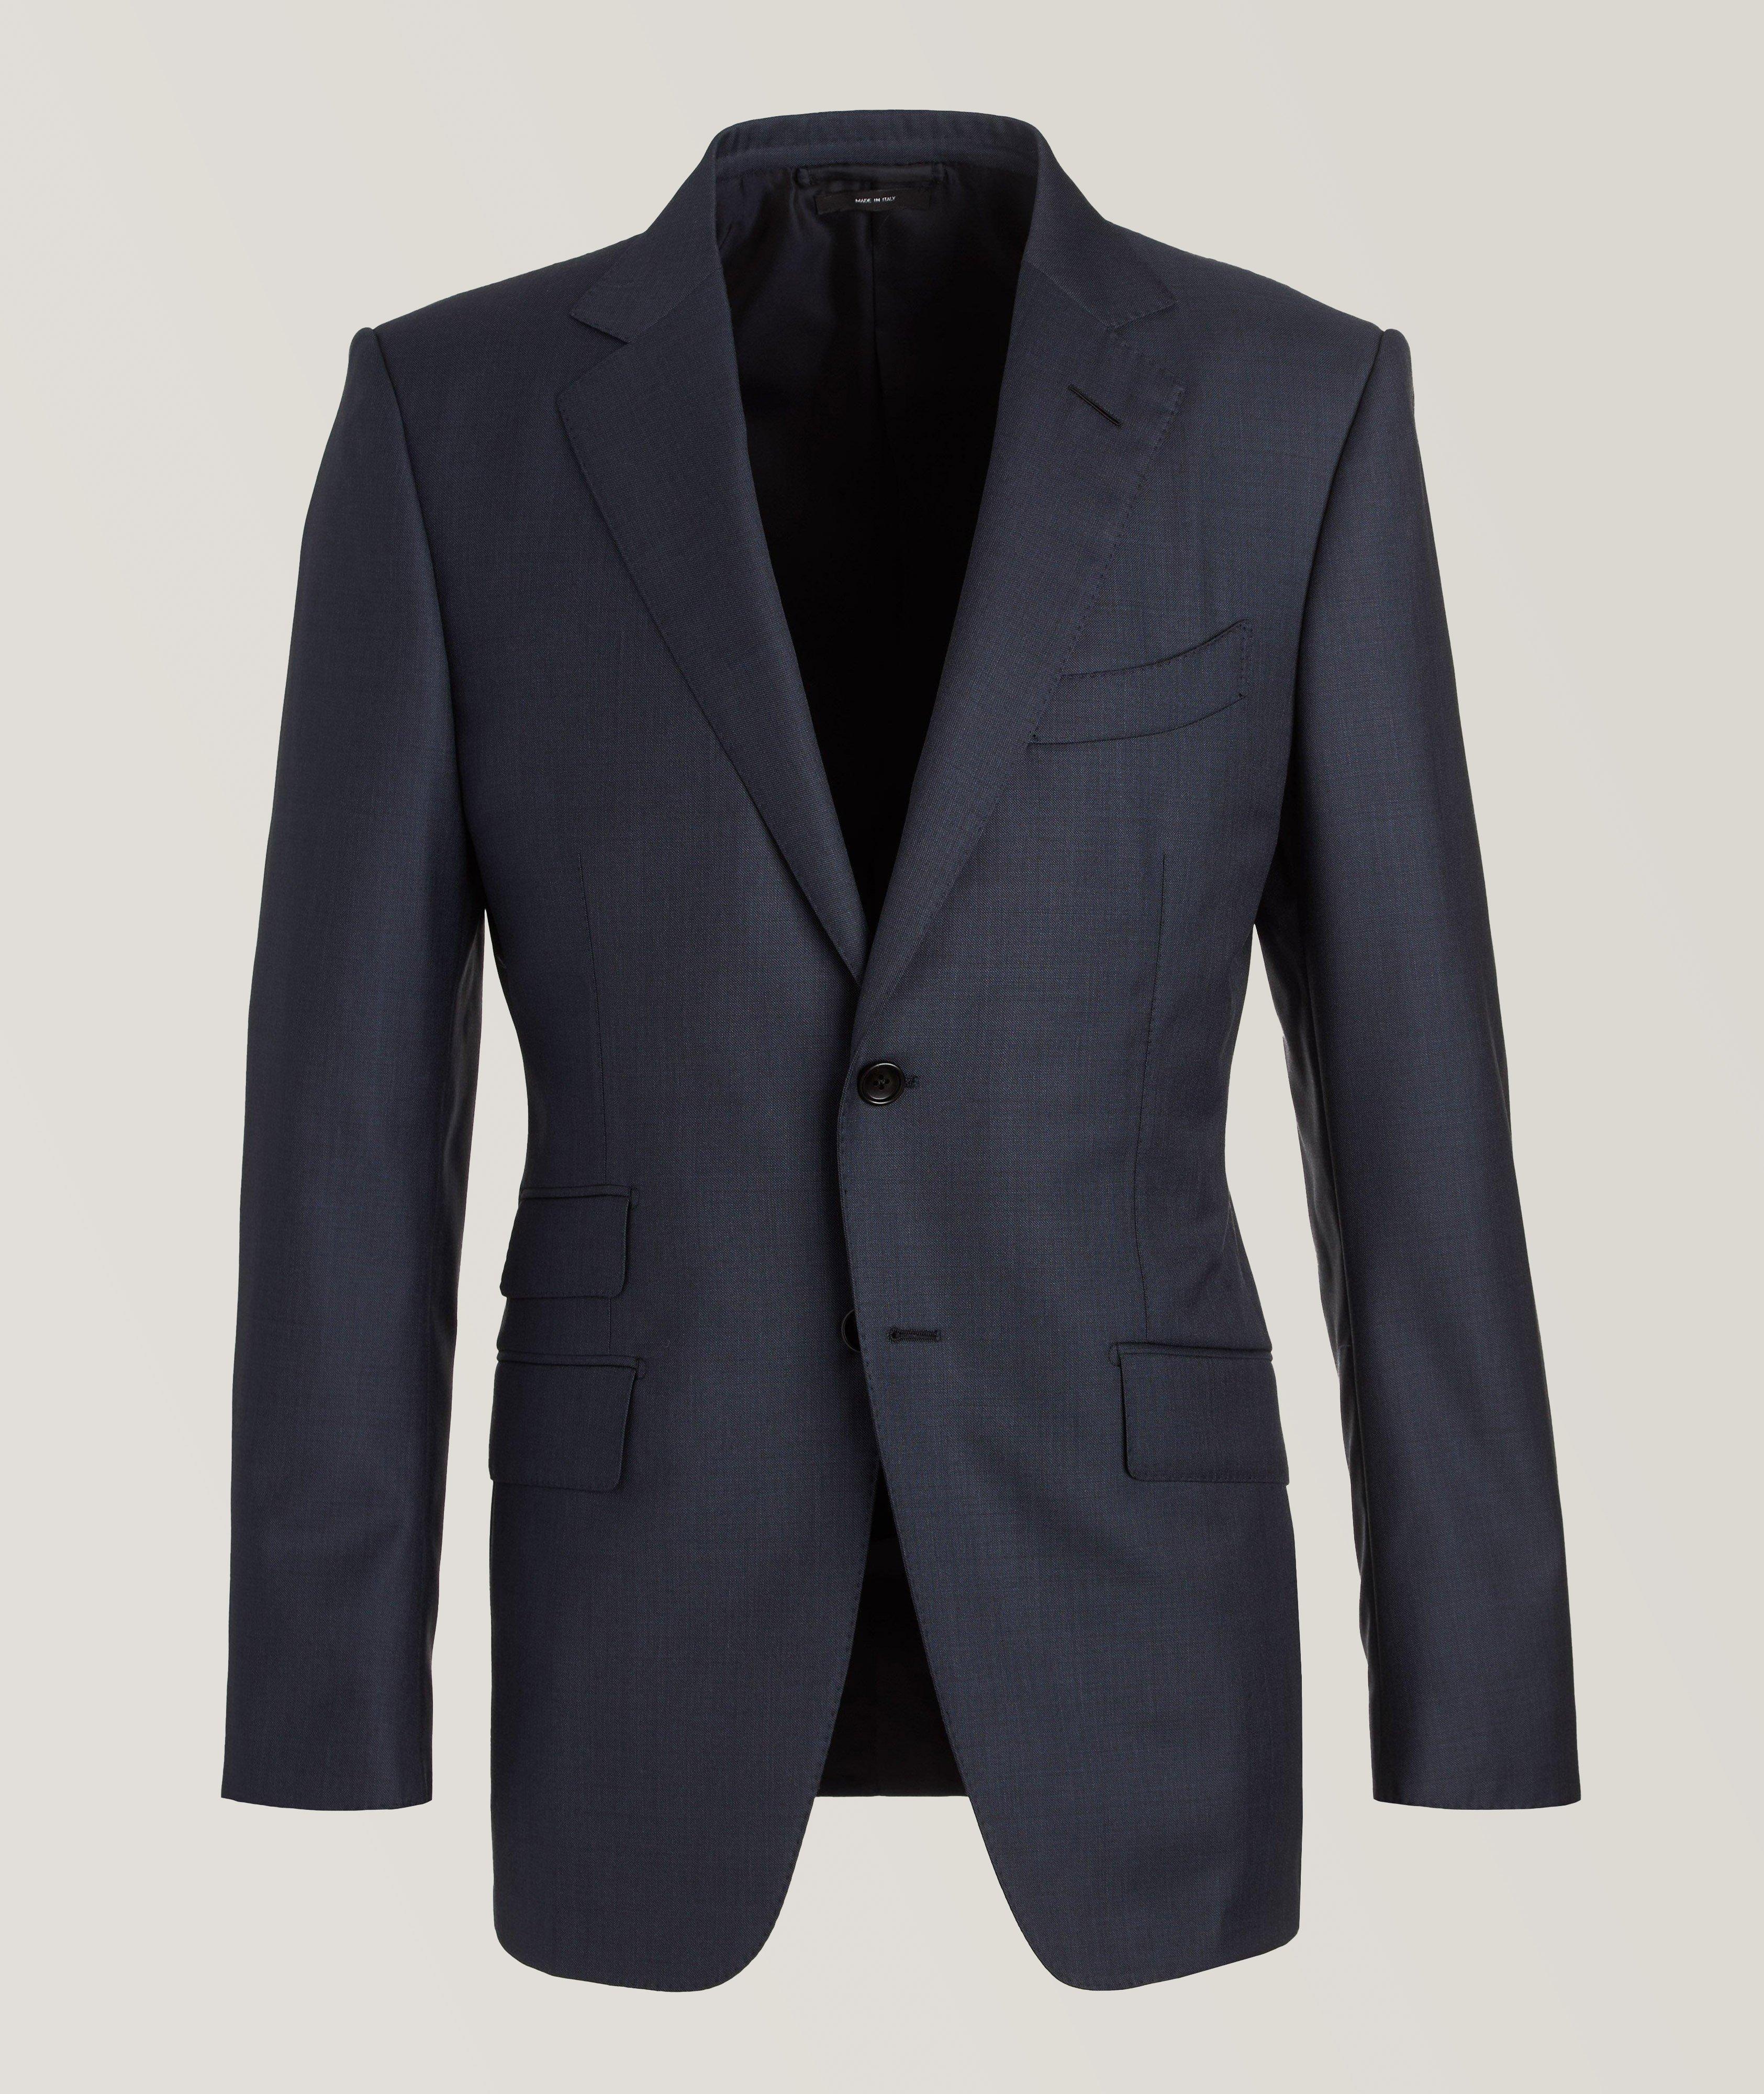 O'Connor Crosshatch Wool Suit image 0